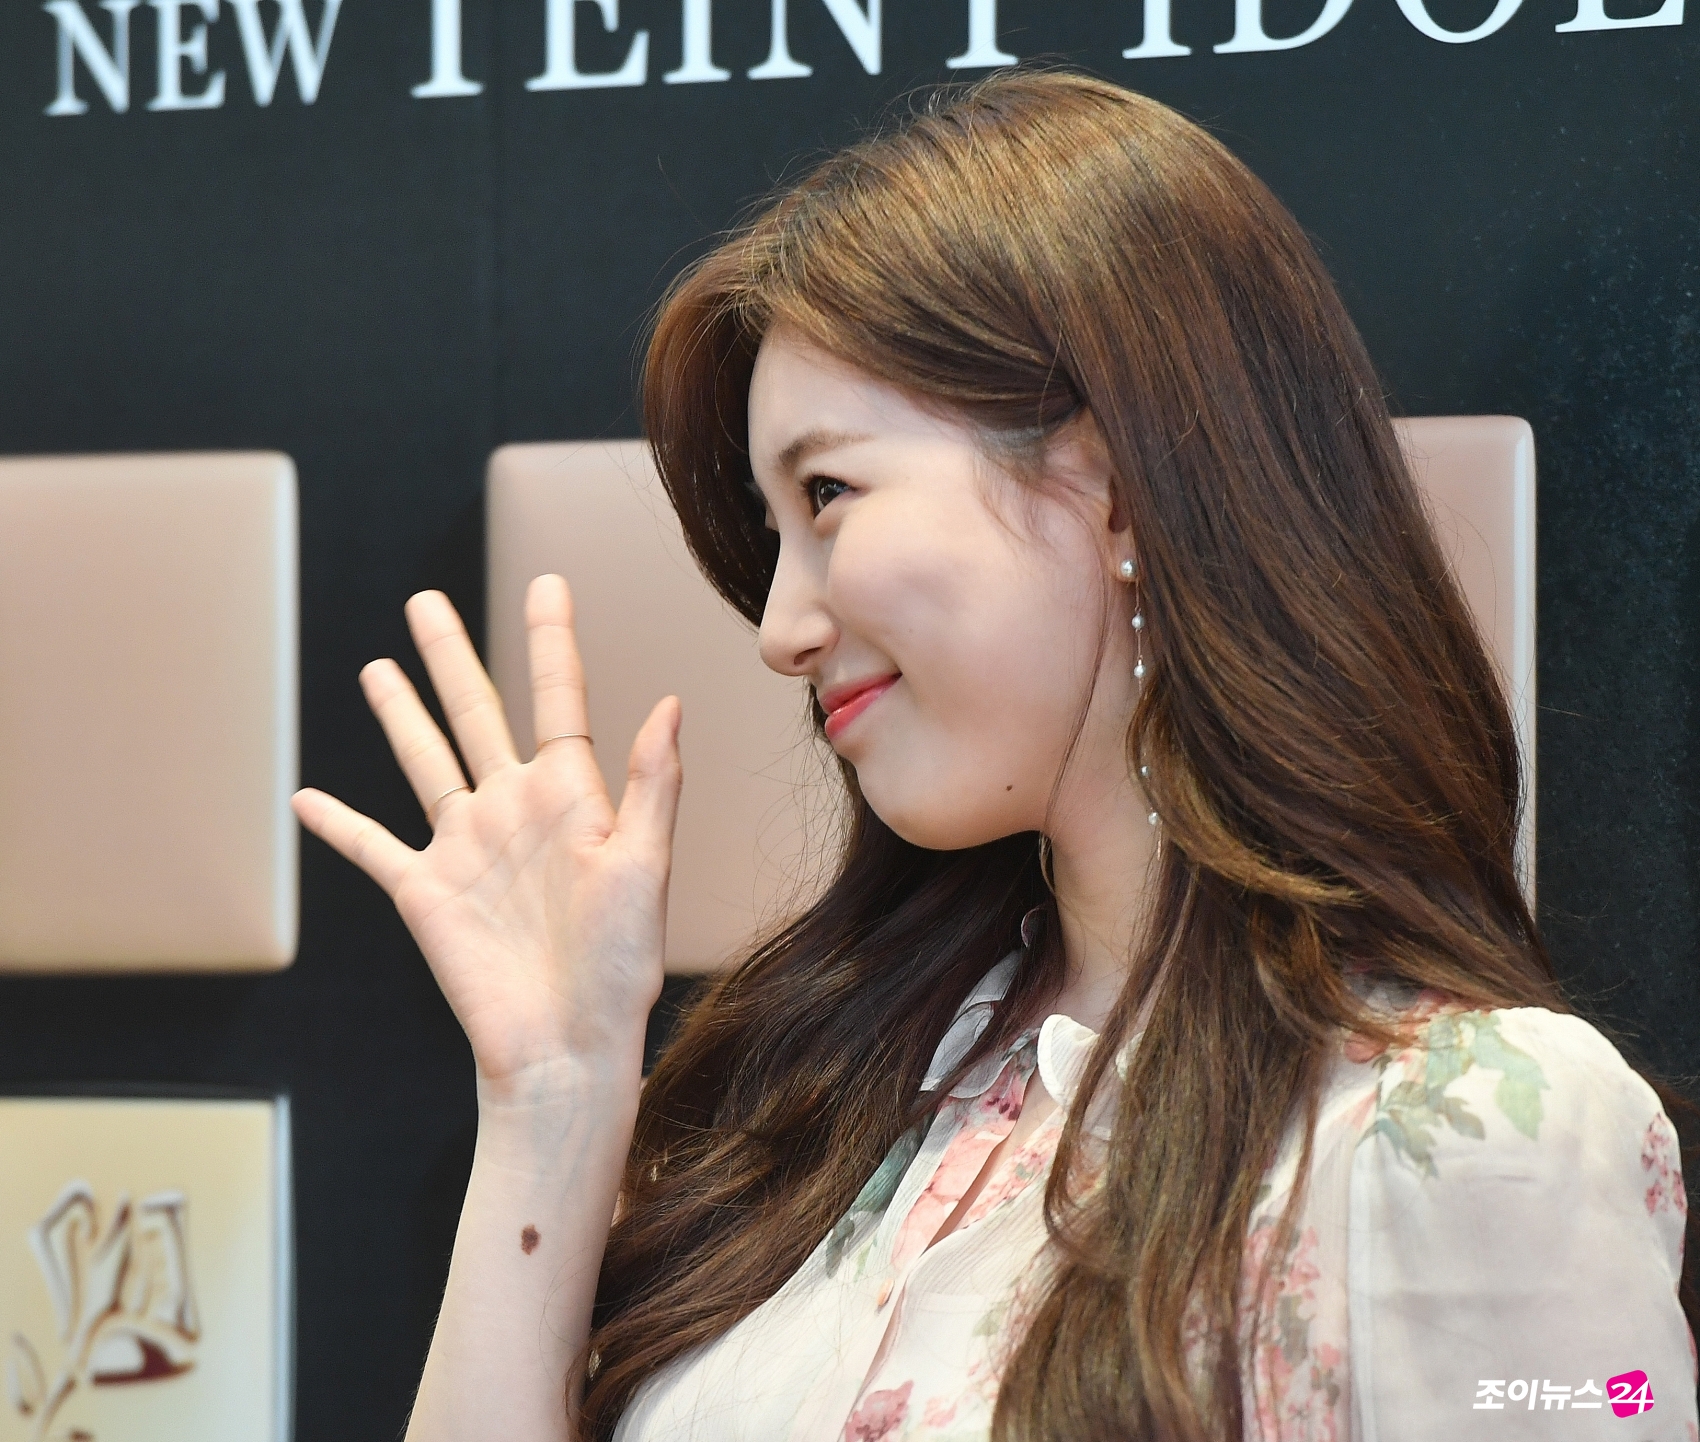 Actor and singer Bae Suzy poses at the Global Beauty Brand Lancome Photo Call Event held at Myeongdong branch of Shinsegae Duty Free Shop in Jung-gu, Seoul on the afternoon of the 19th.Lancome held a Make-up event at the event hall to commemorate the launch of the global campaign of Make-Up Is My Power (MAKE UP IS MY POWER) of the new foundation line Edol Long Rasting Foundation.